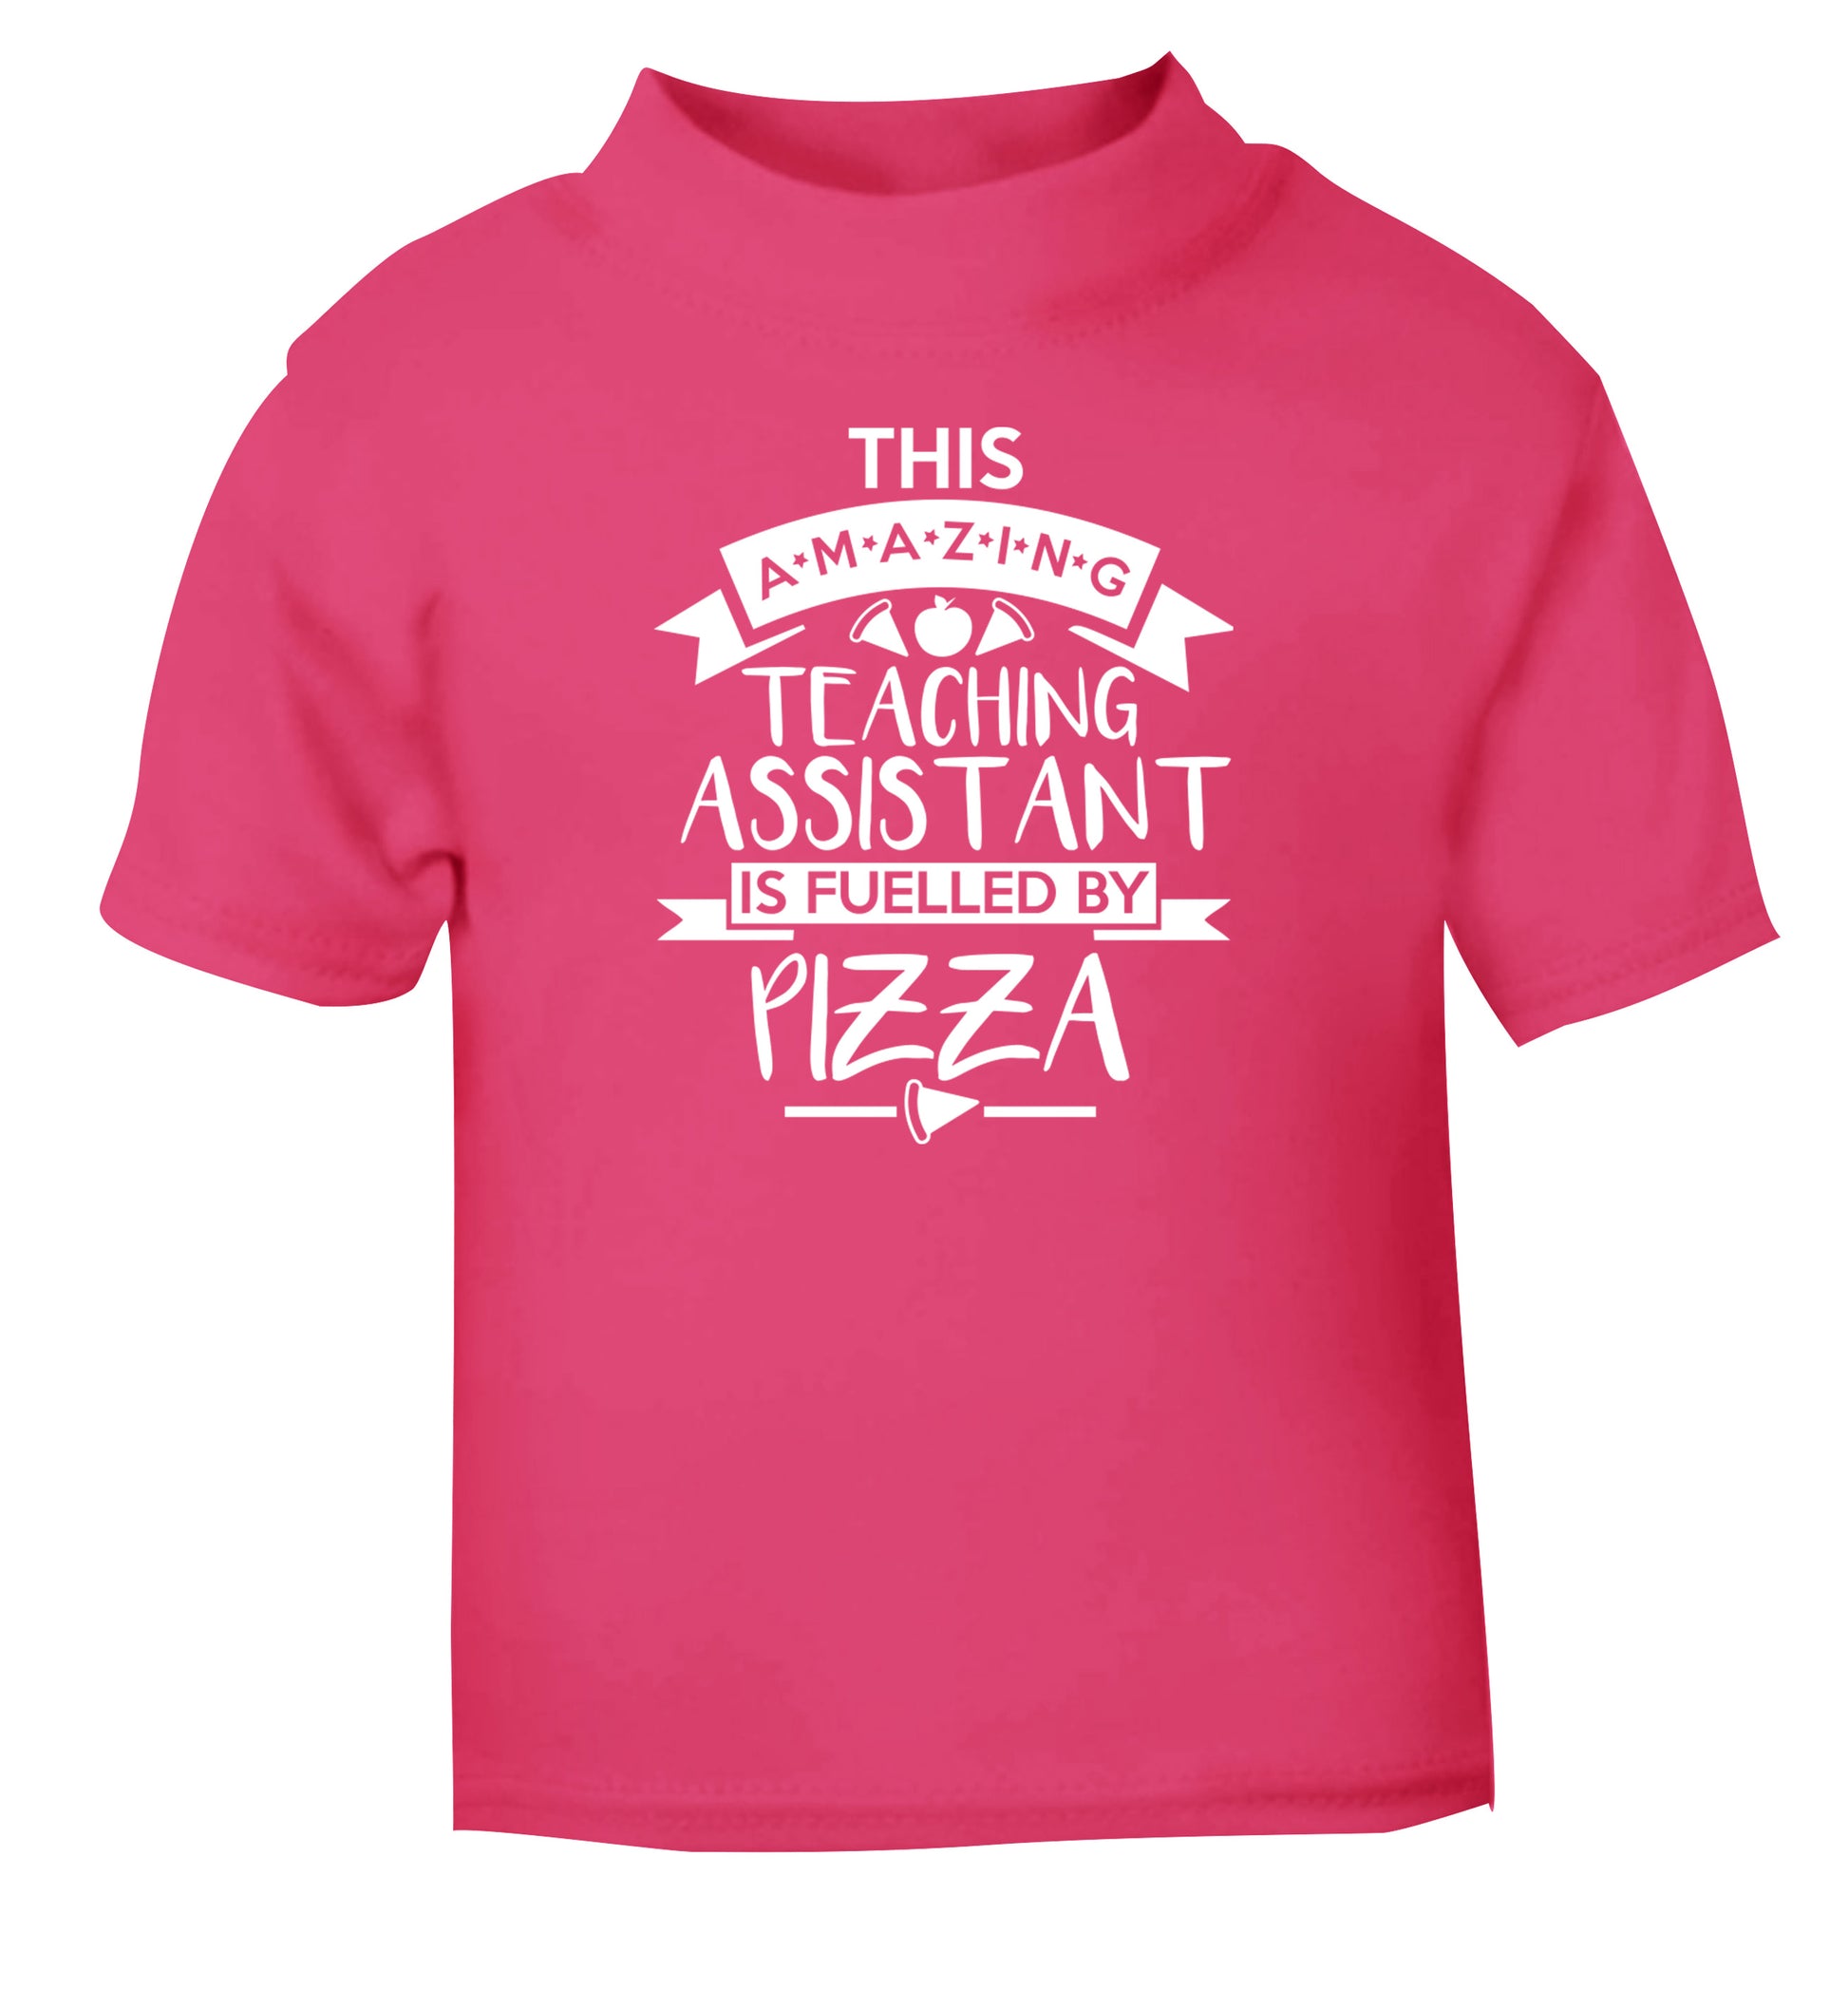 This amazing teaching assistant is fuelled by pizza pink Baby Toddler Tshirt 2 Years